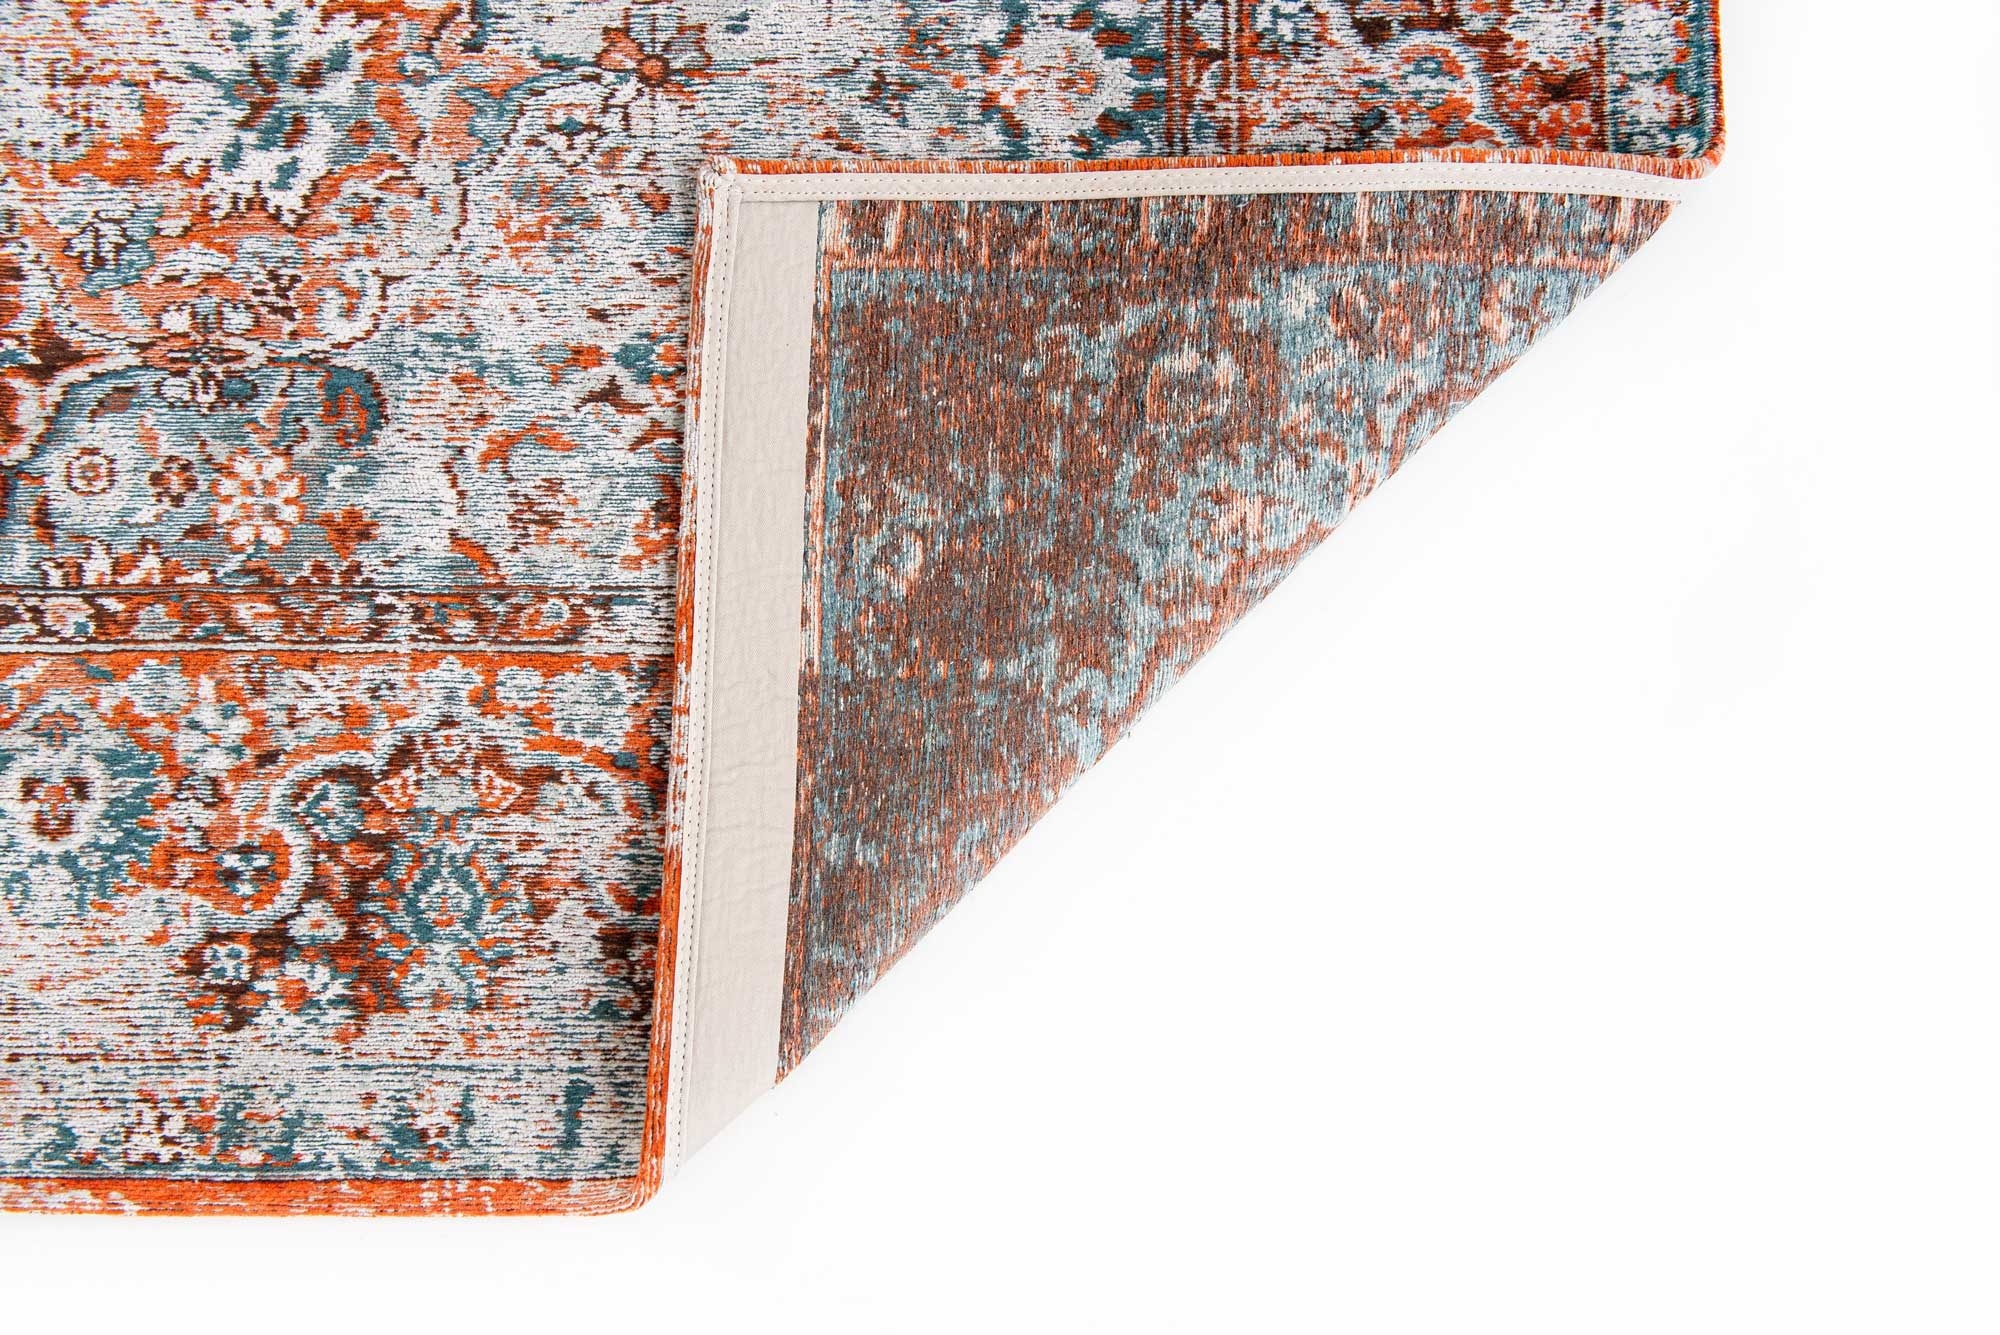 Antique Bakhtiari rug from the Antiquarian Collection - Galata 